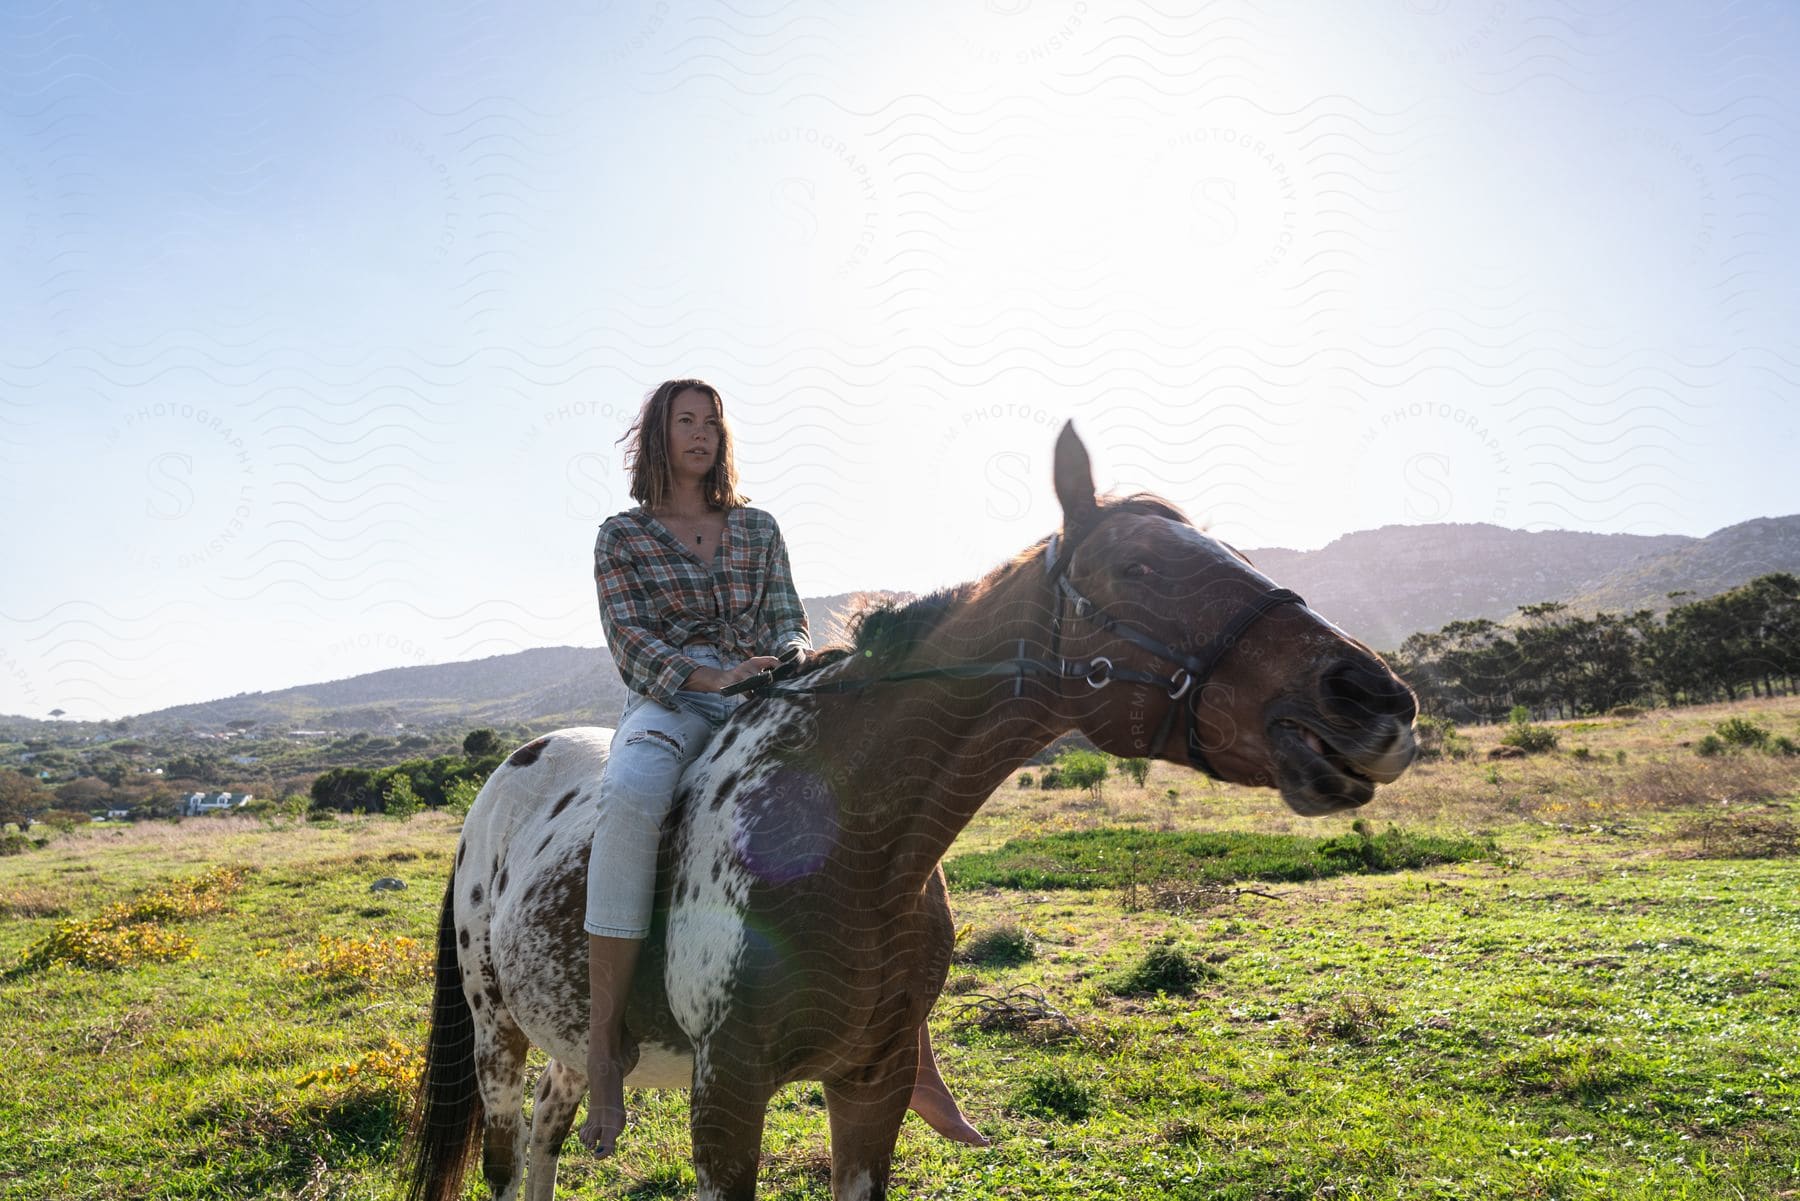 Barefoot woman riding a horse in a field with mountains in the background.